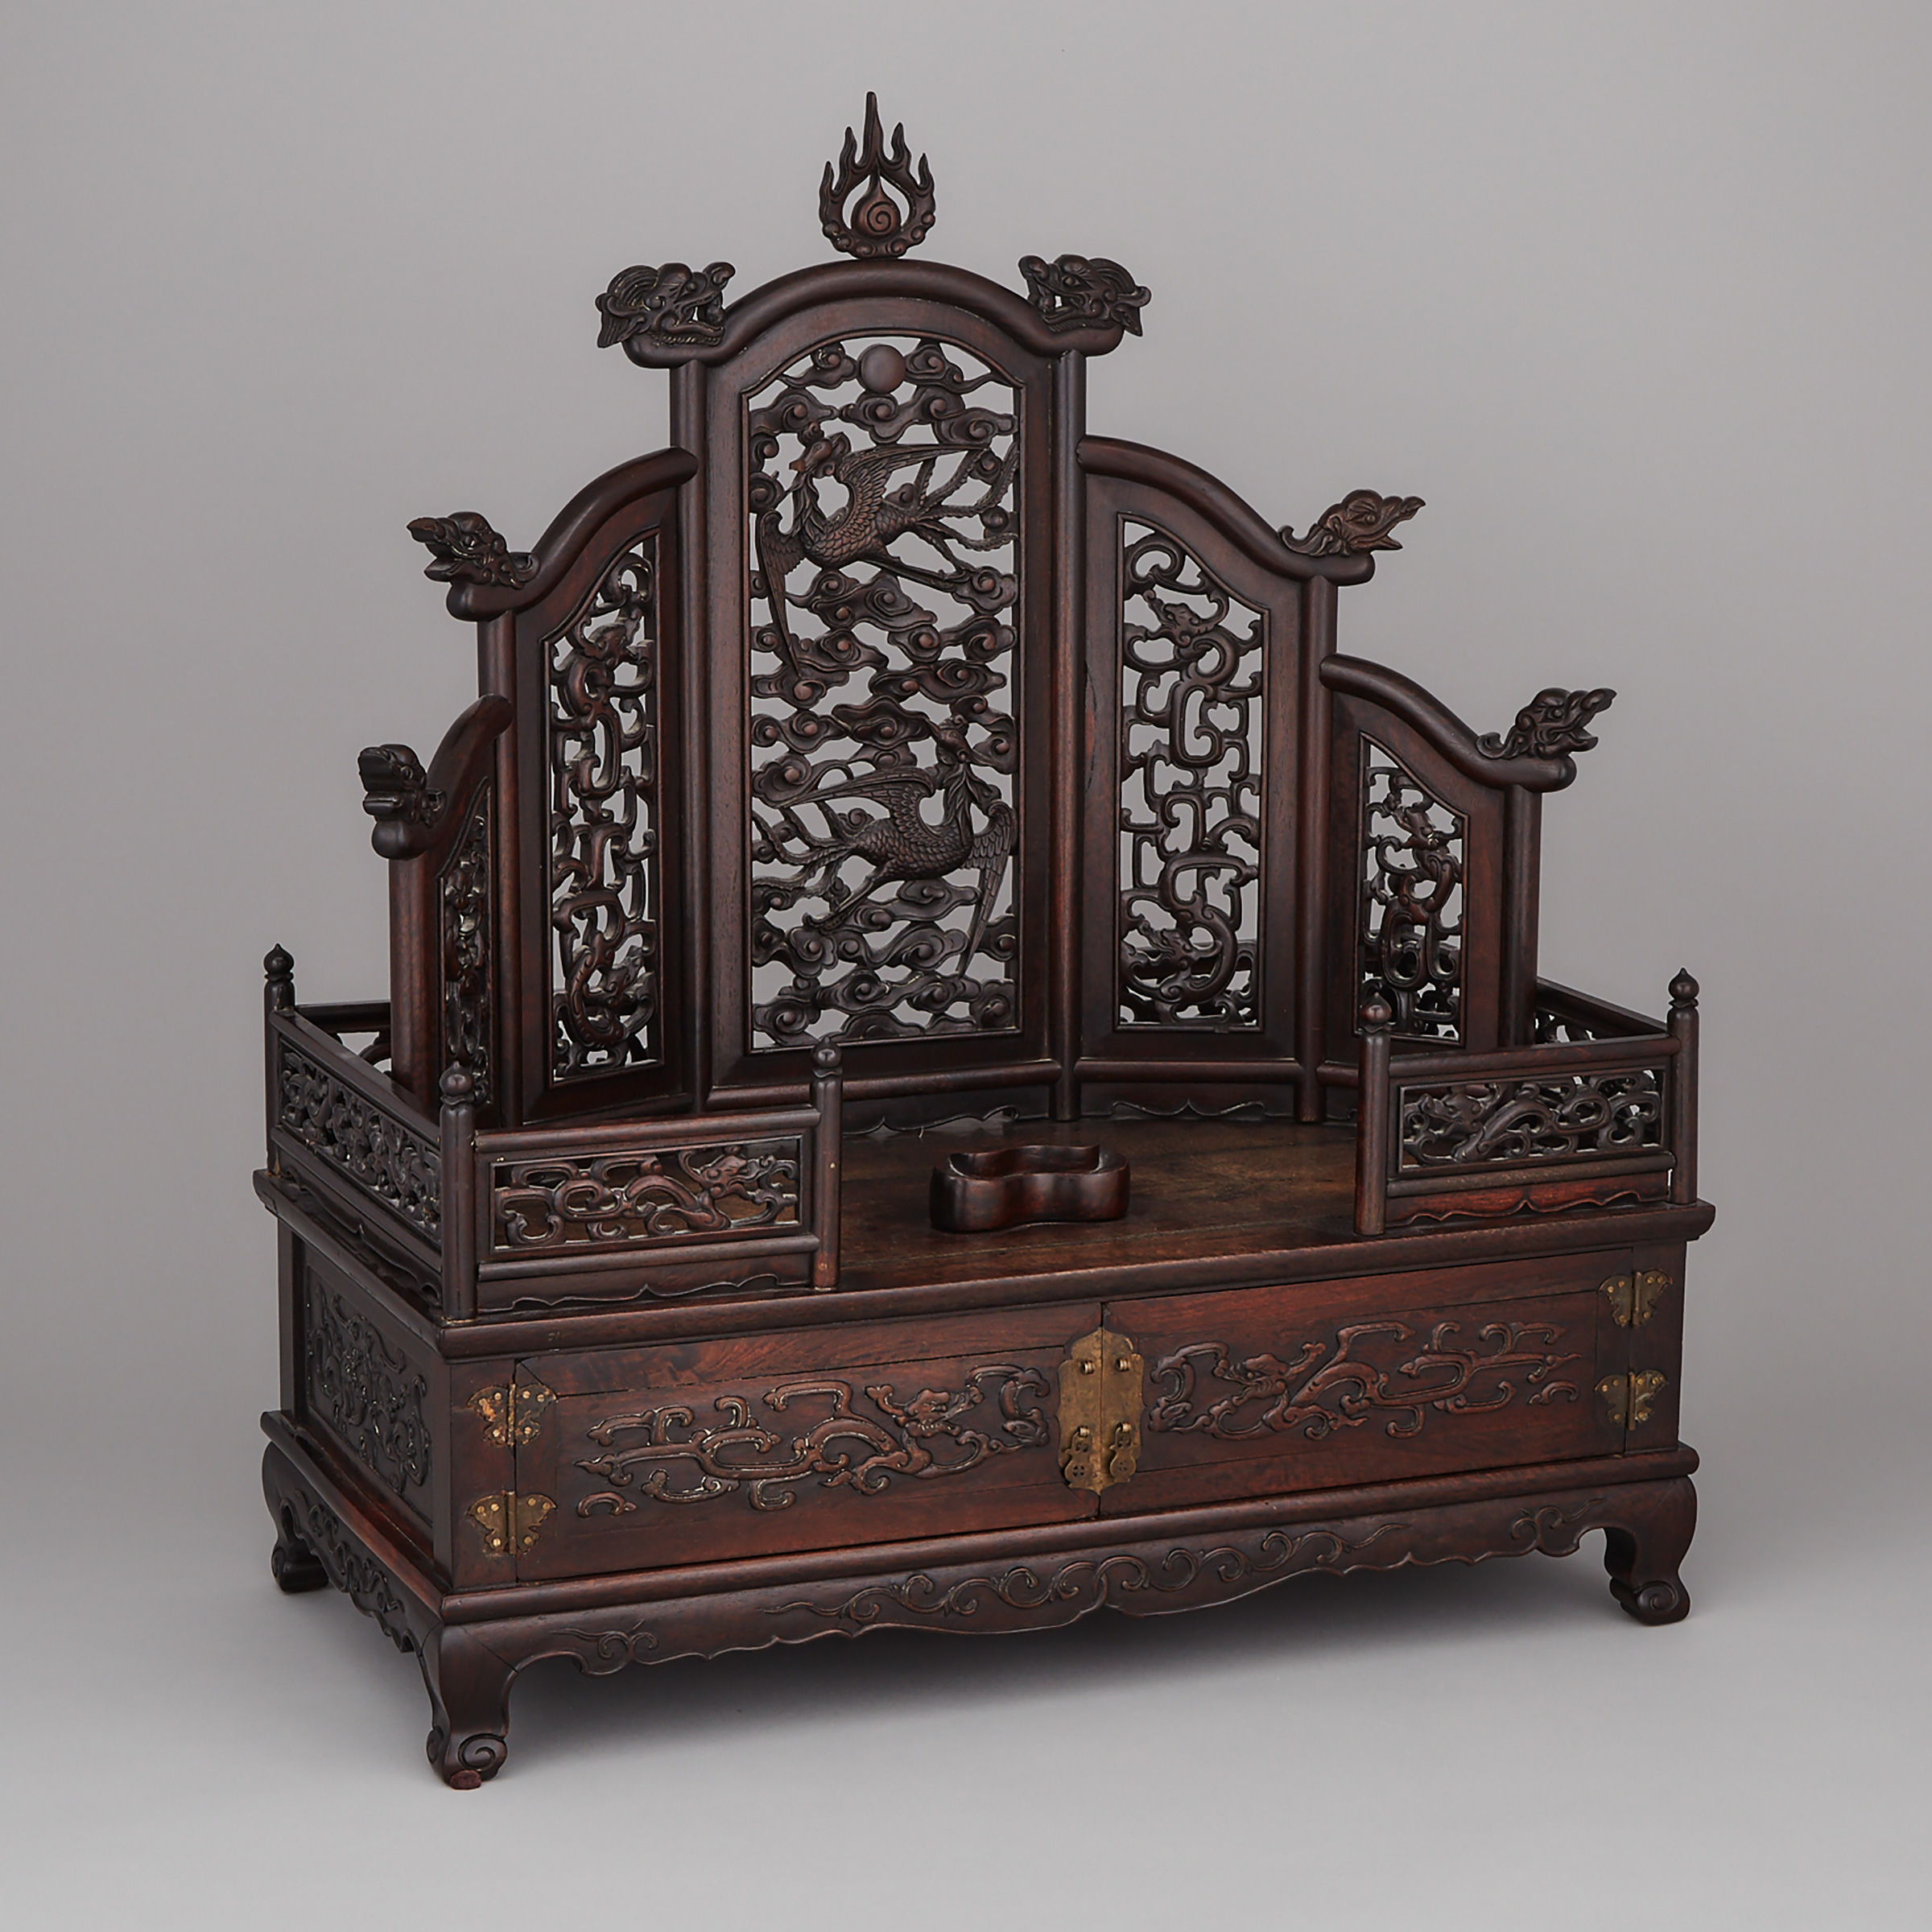 A Huali and Mixed Hardwood Carved Mirror Stand, 19th/Early 20th Century